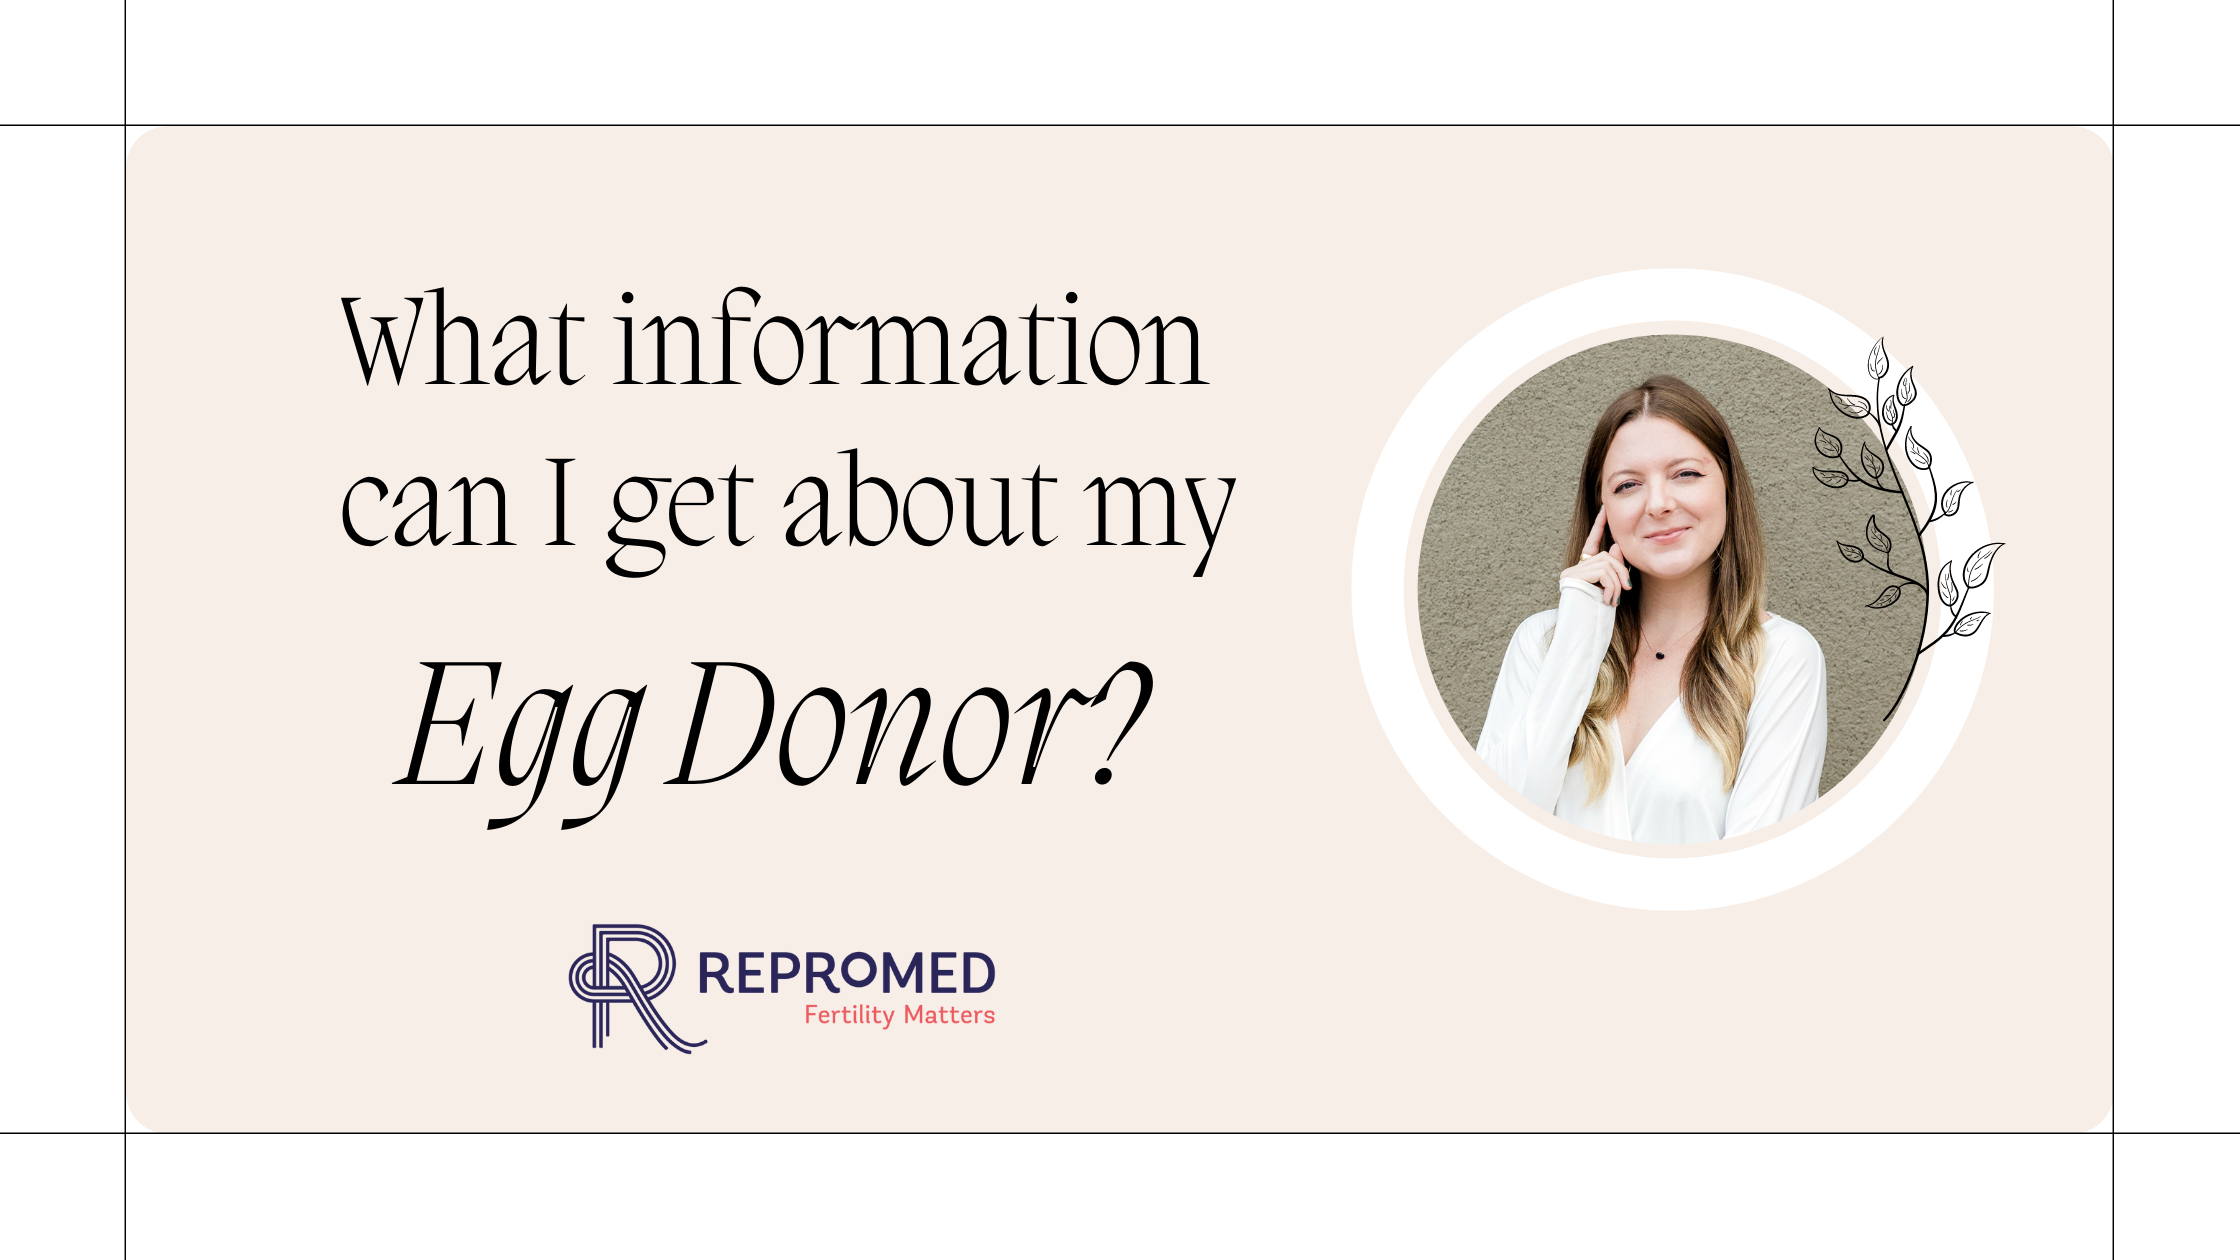 What information can I get about my Egg Donor?